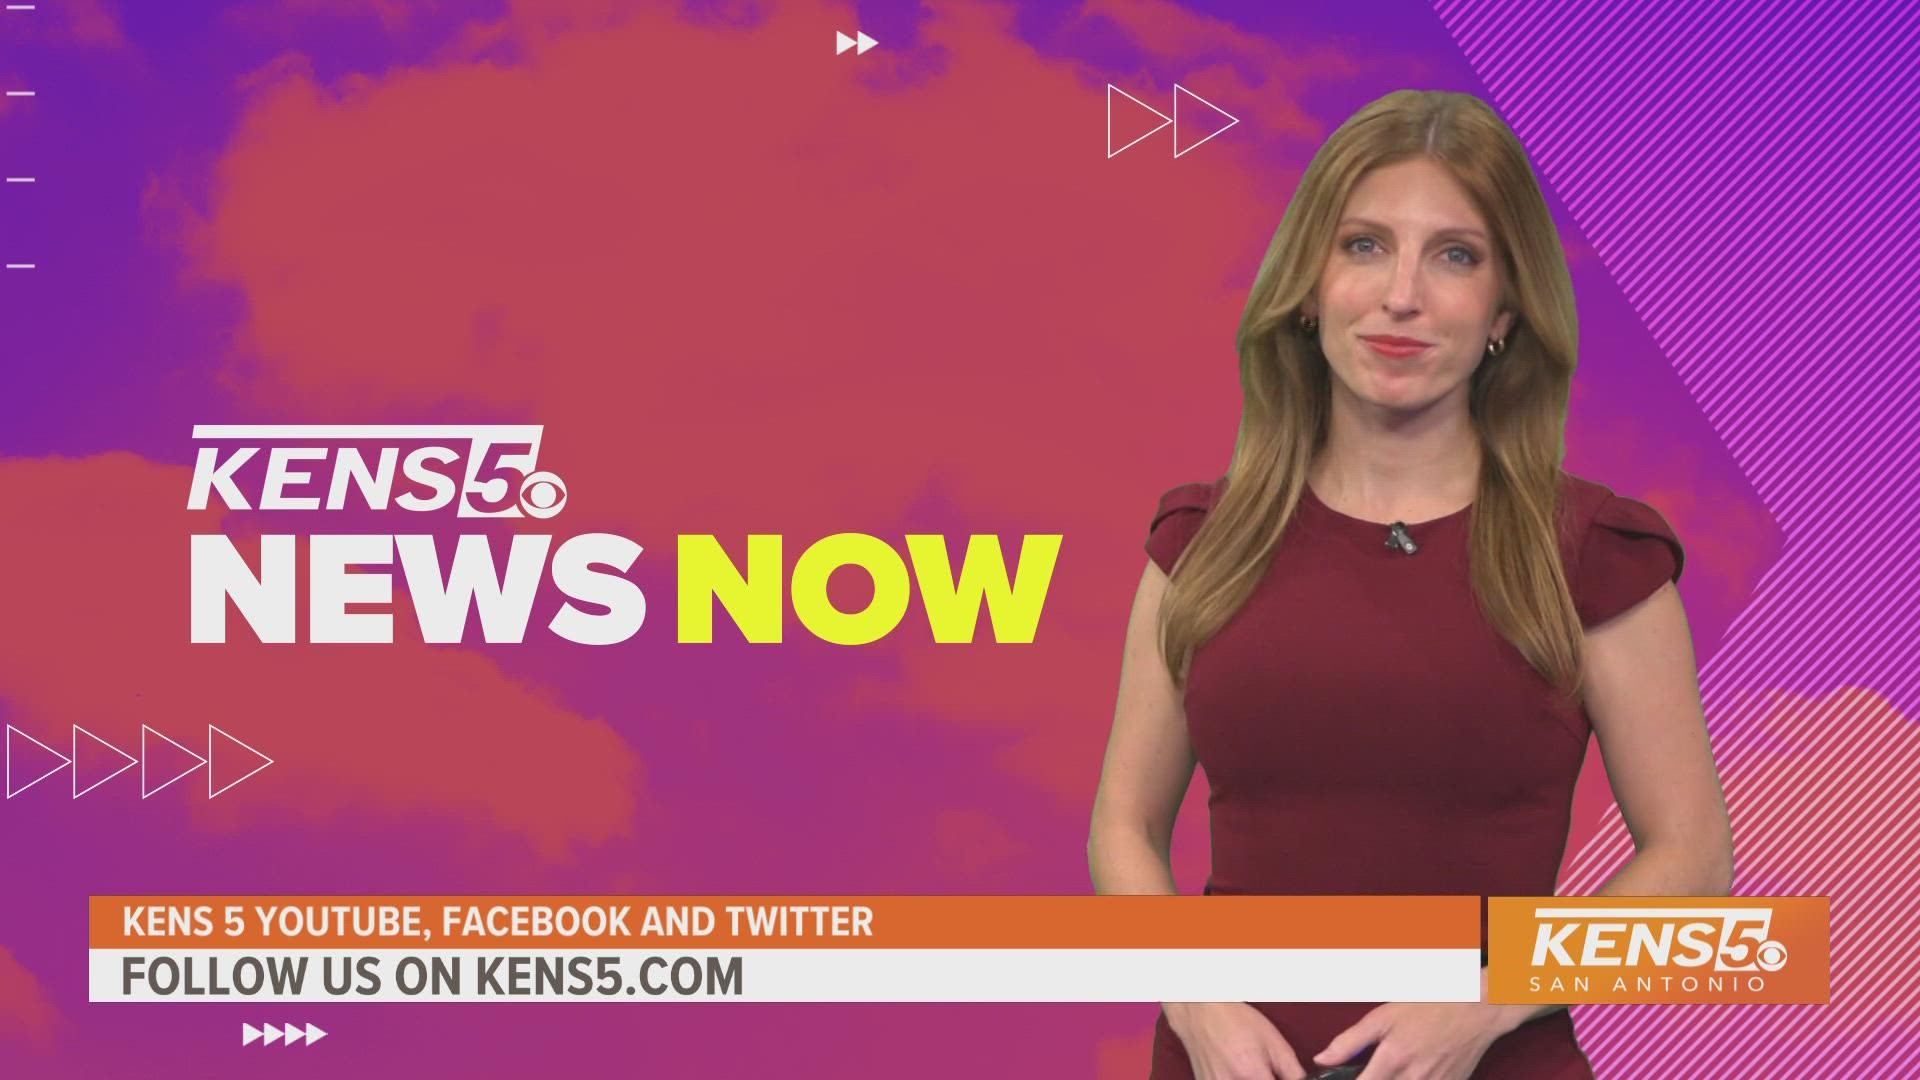 Follow us here to get the latest top headlines with KENS 5's morning show every weekday.